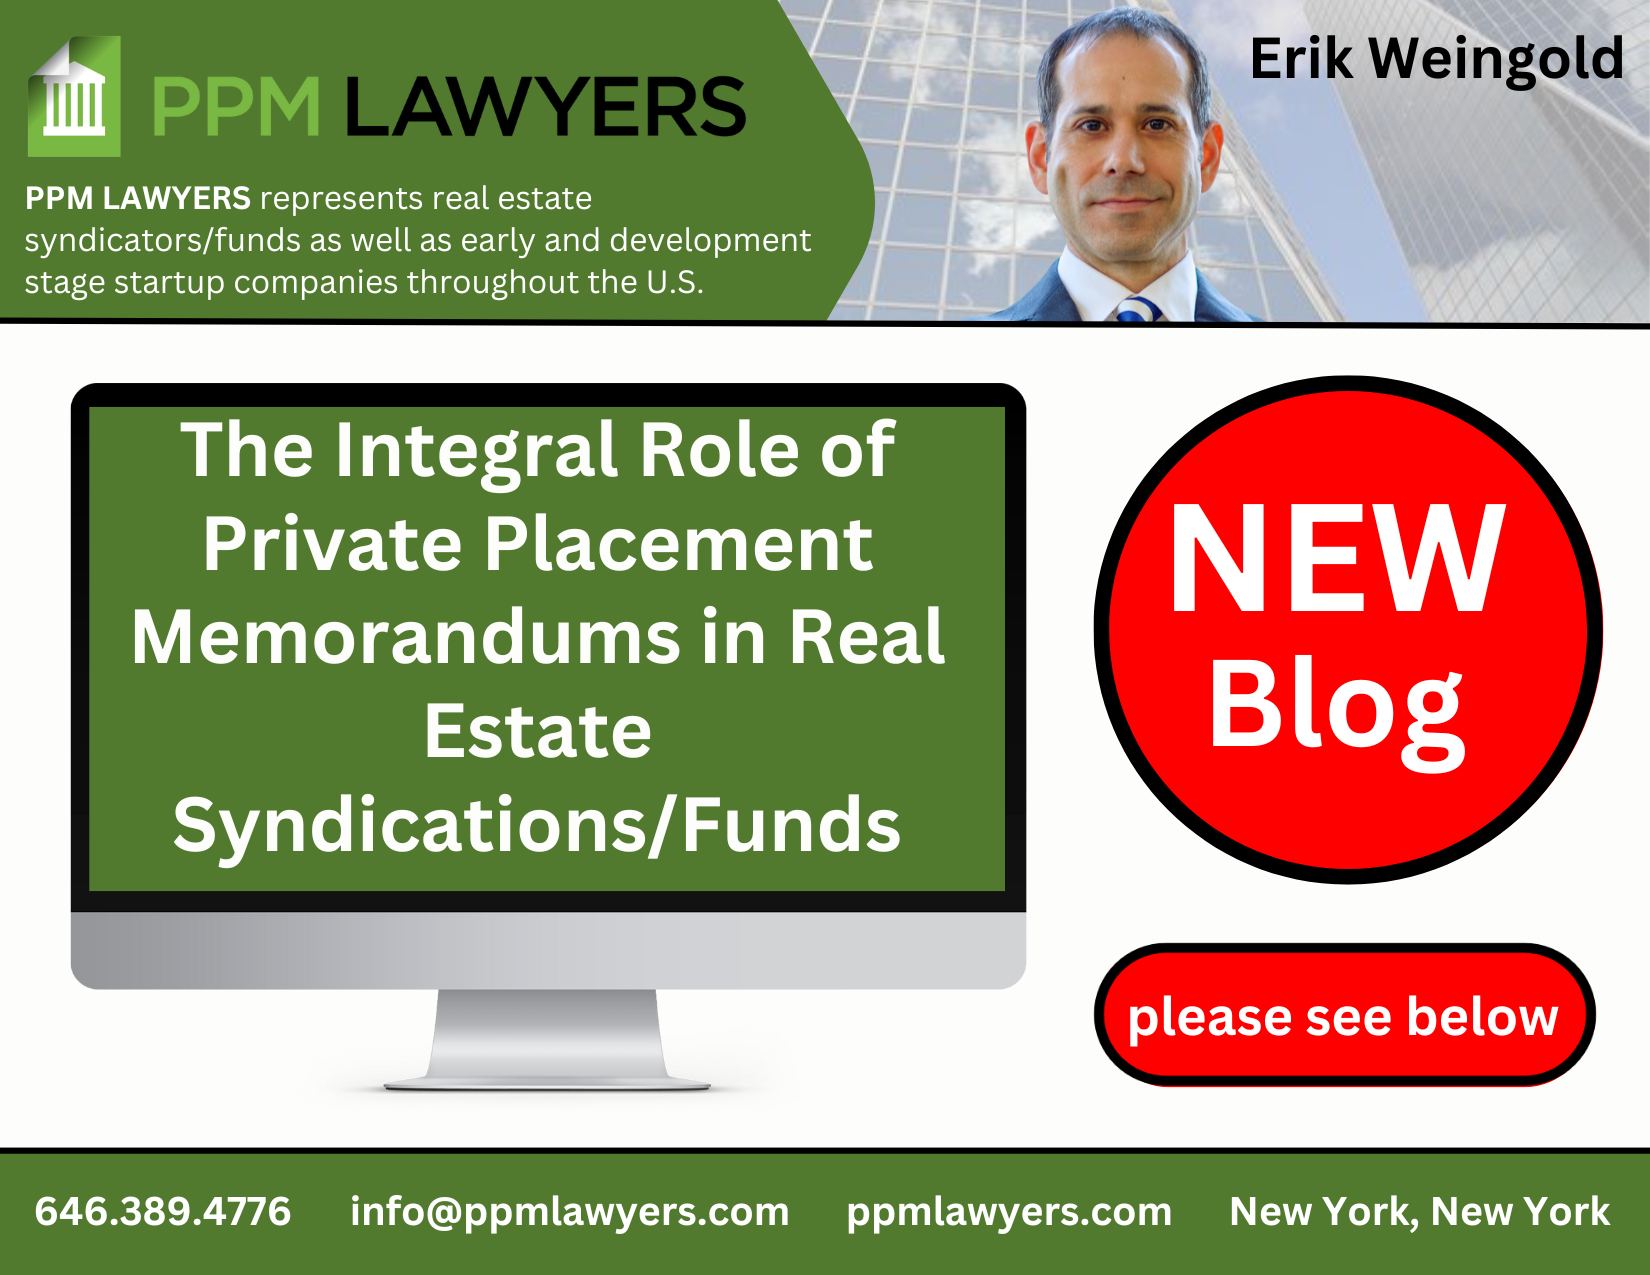 The Integral Role Of Private Placement Memorandums In Real Estate Syndications/Funds